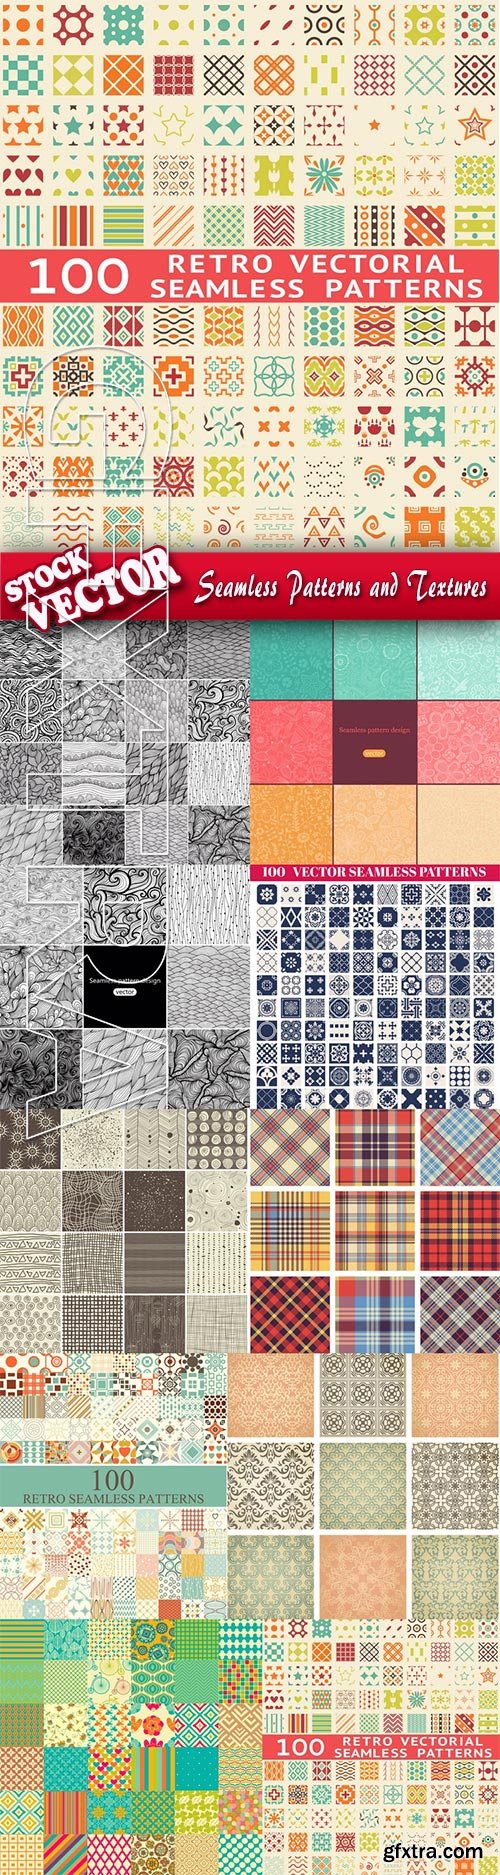 Stock Vector - Seamless Patterns and Textures